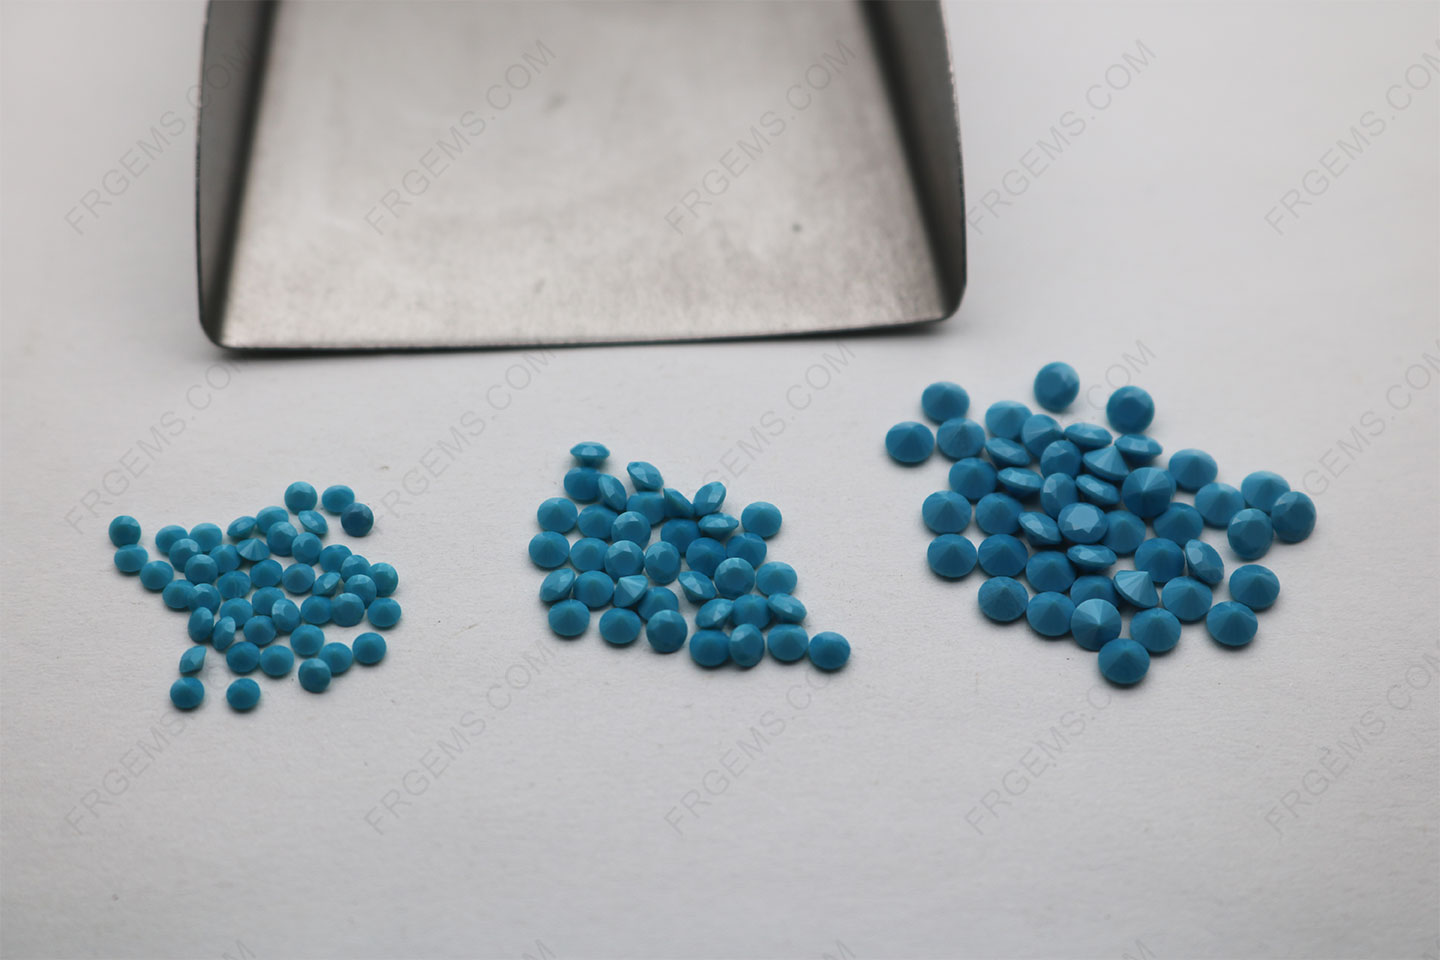 Nano Crystal Turquoise blue color #331 Round shape faceted Small melee size gemstones for wax casting